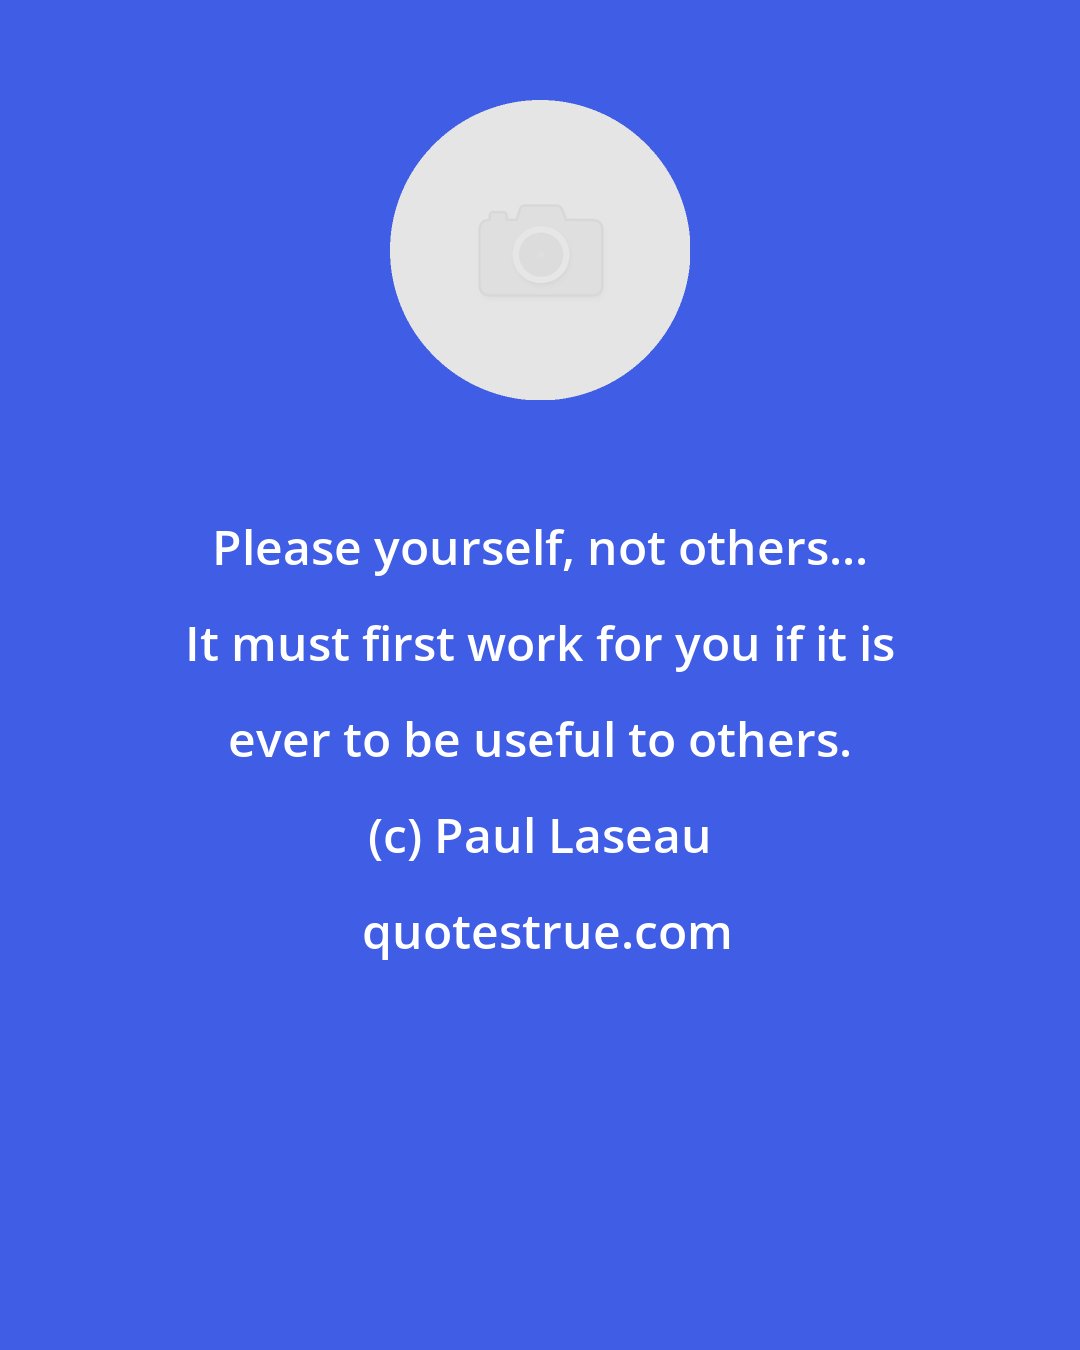 Paul Laseau: Please yourself, not others... It must first work for you if it is ever to be useful to others.